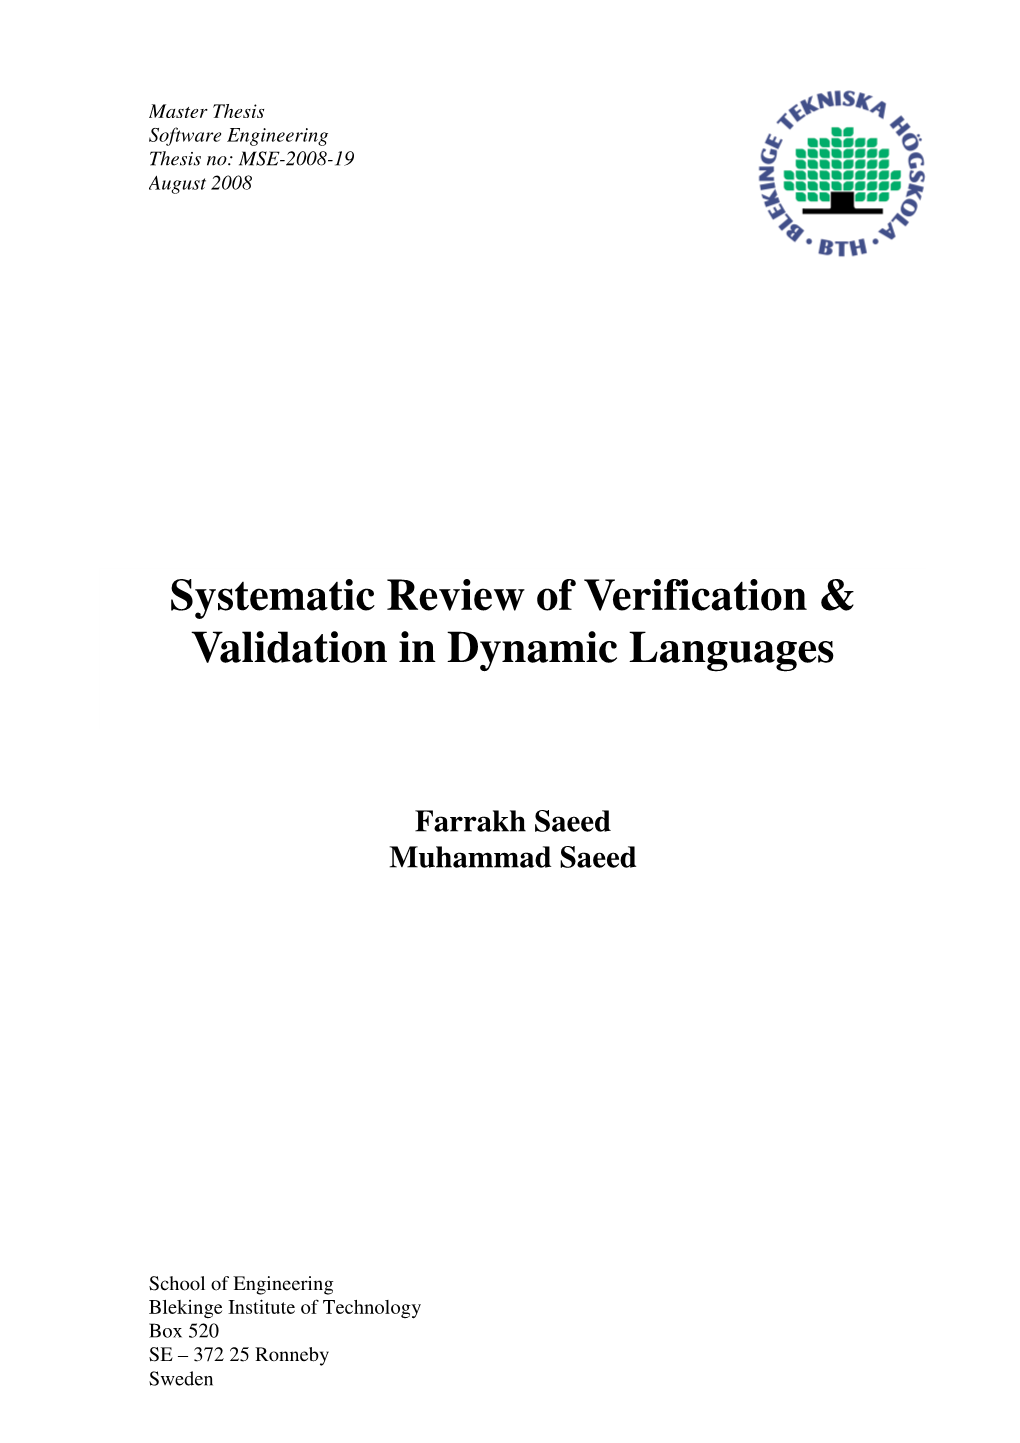 Systematic Review of Verification & Validation in Dynamic Languages